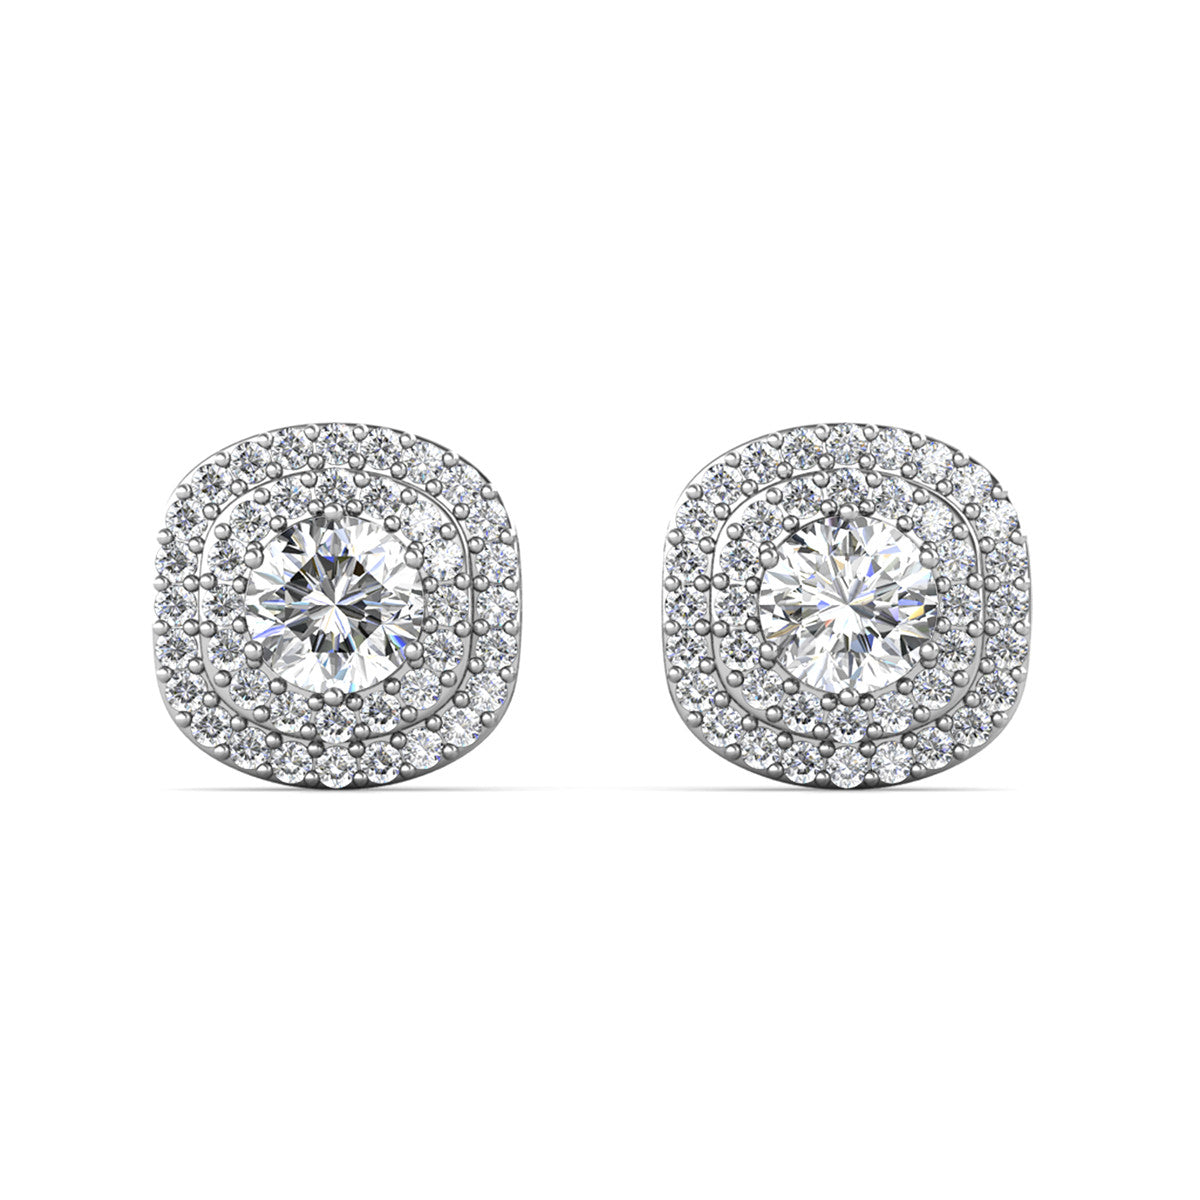 Moissanite by Cate & Chloe Lucy Sterling Silver Stud Earrings with Moissanite and 5A Cubic Zirconia Crystals